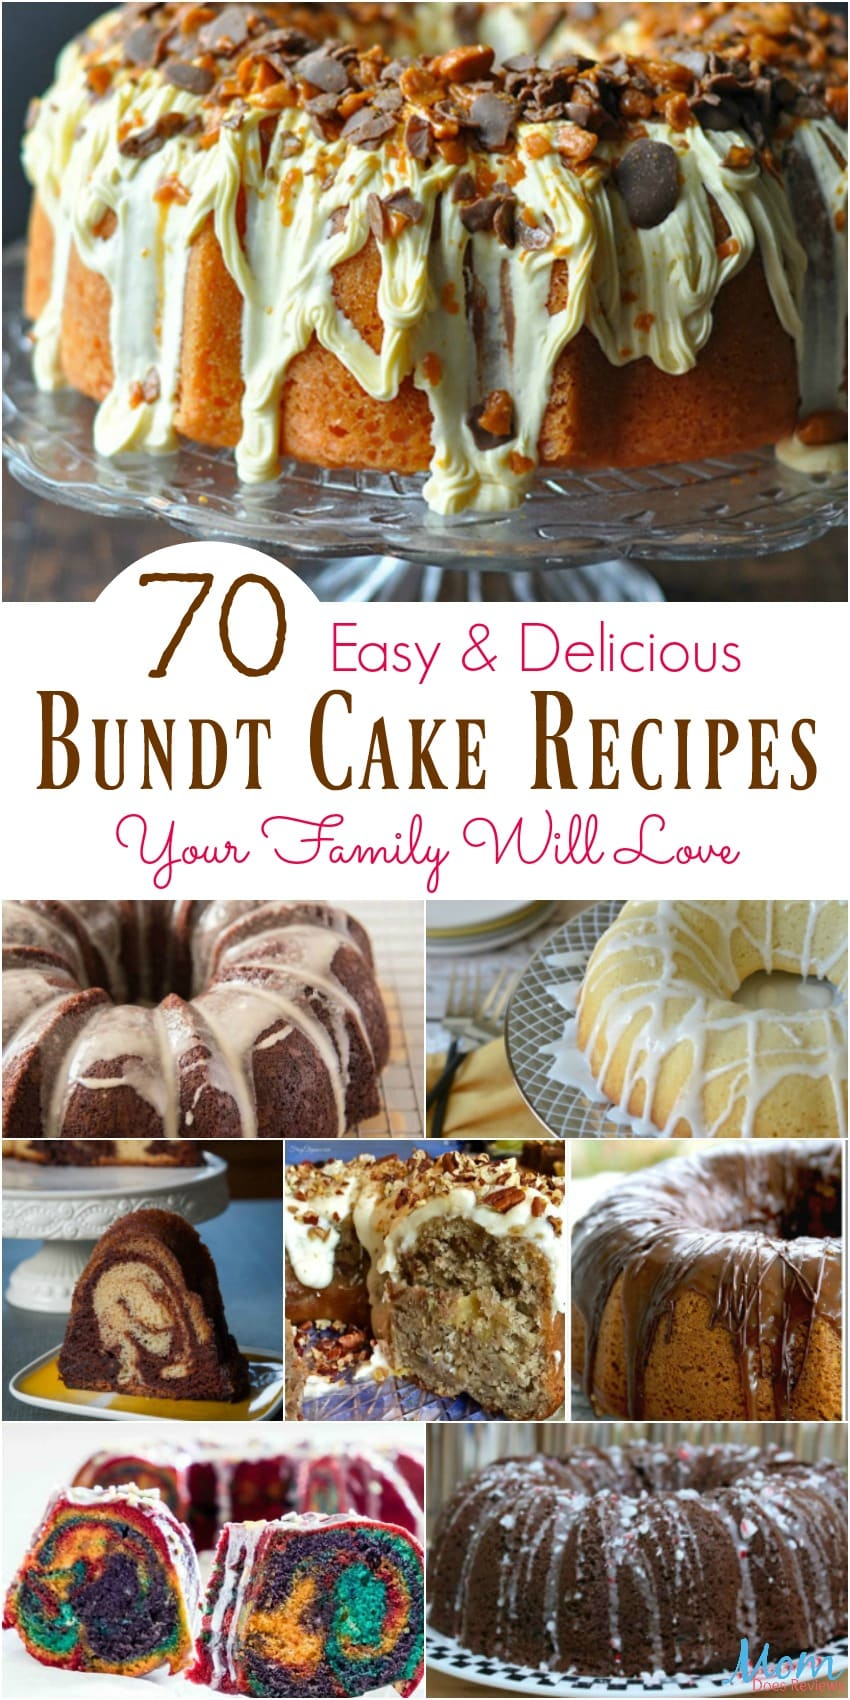 70 Easy & Delicious Bundt Cake Recipes Your Family Will Love #cakes #recipes #desserts #sweets #yummy 